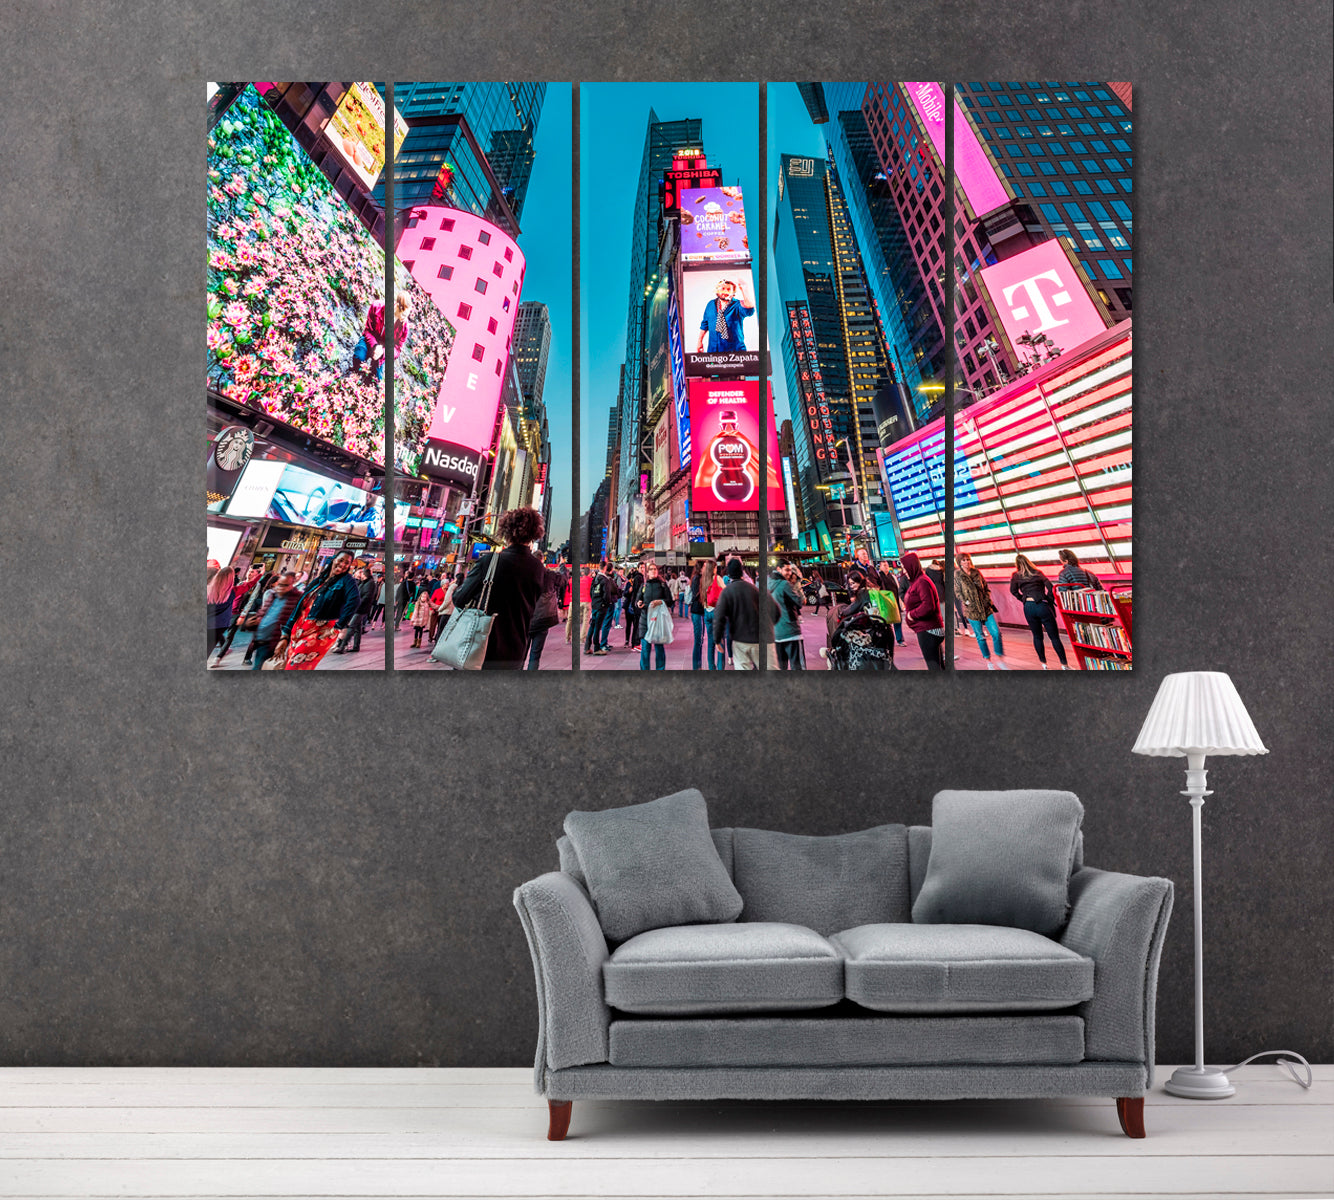 Times Square with Neon Billboards New York Canvas Print ArtLexy 5 Panels 36"x24" inches 